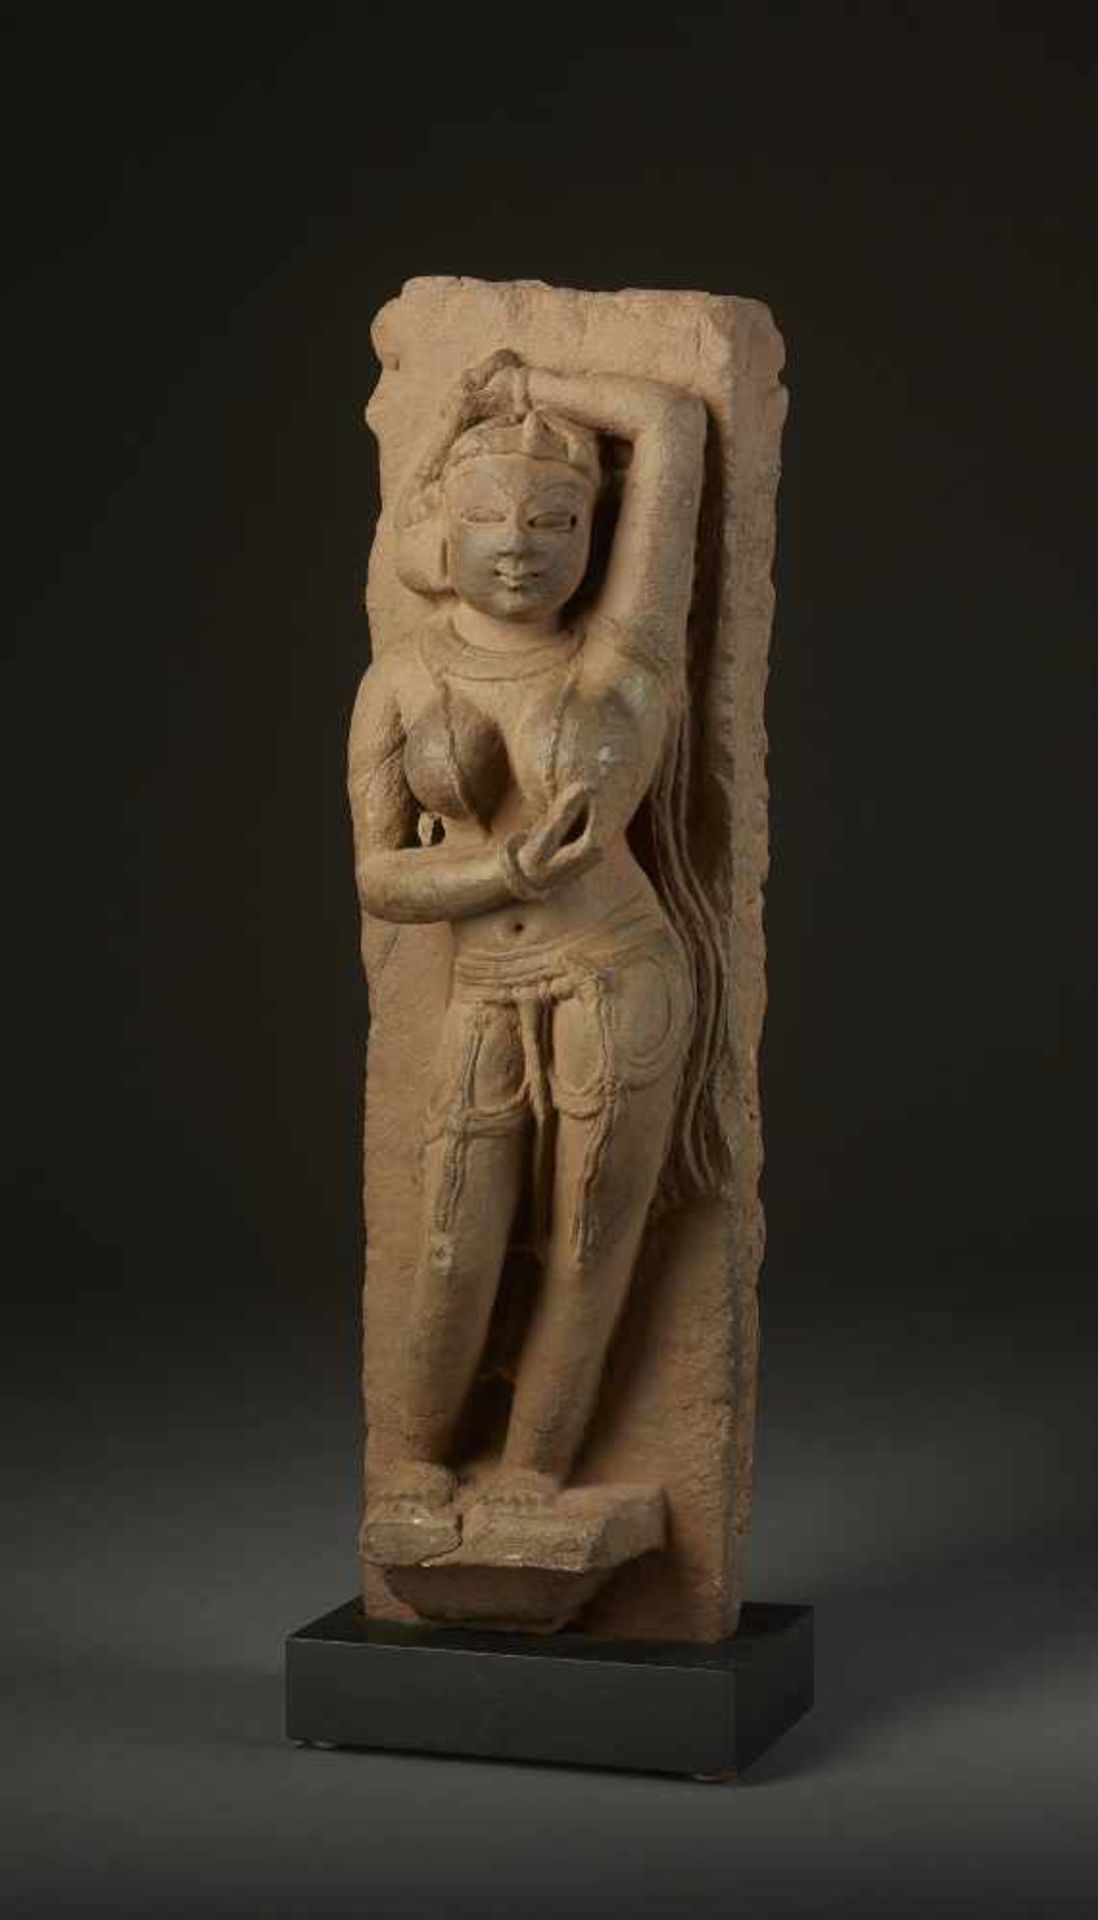 A SANDSTONE YAKSHINI 10th CENTURYCentral India, 10th - 11th century. The pillar fragment carved in